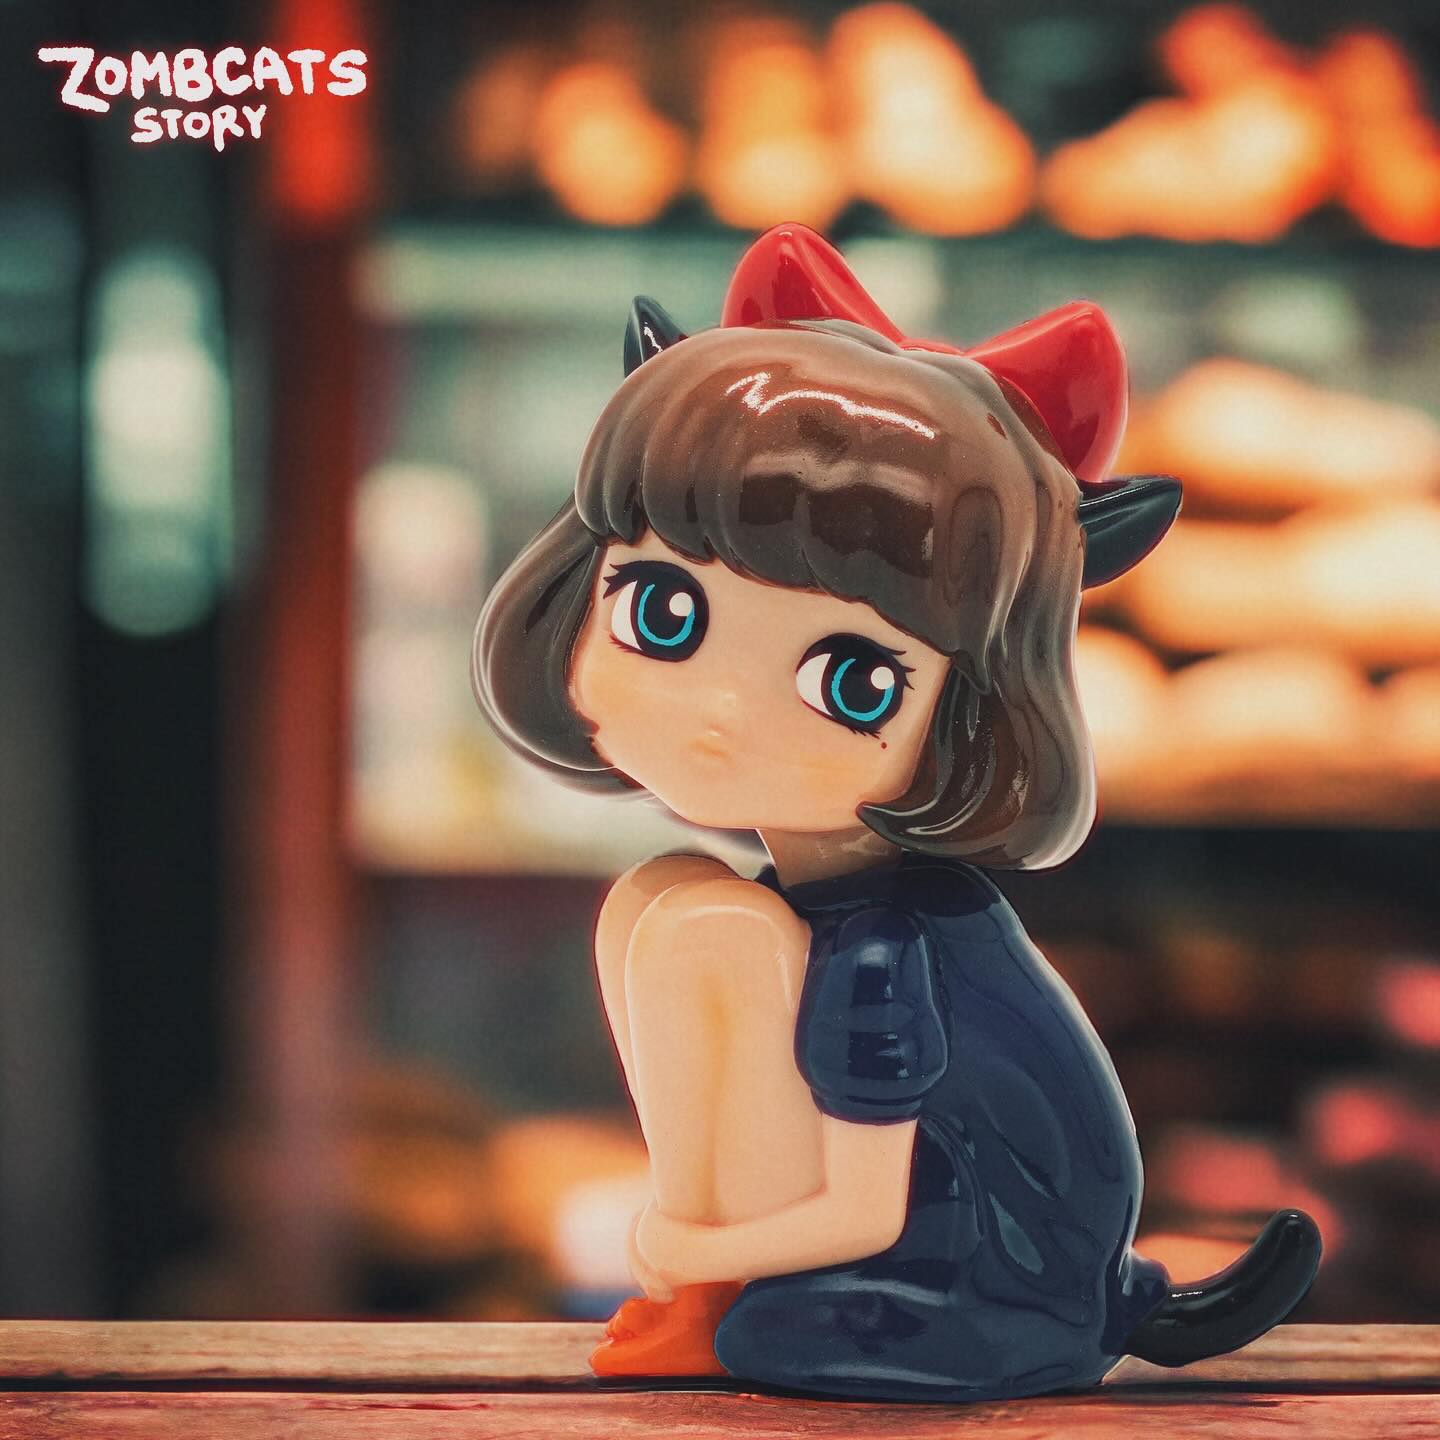 Nekomume figurine with doll and cartoon elements, limited edition toy girl and statue with horns, close-ups of high-heeled shoe and objects.